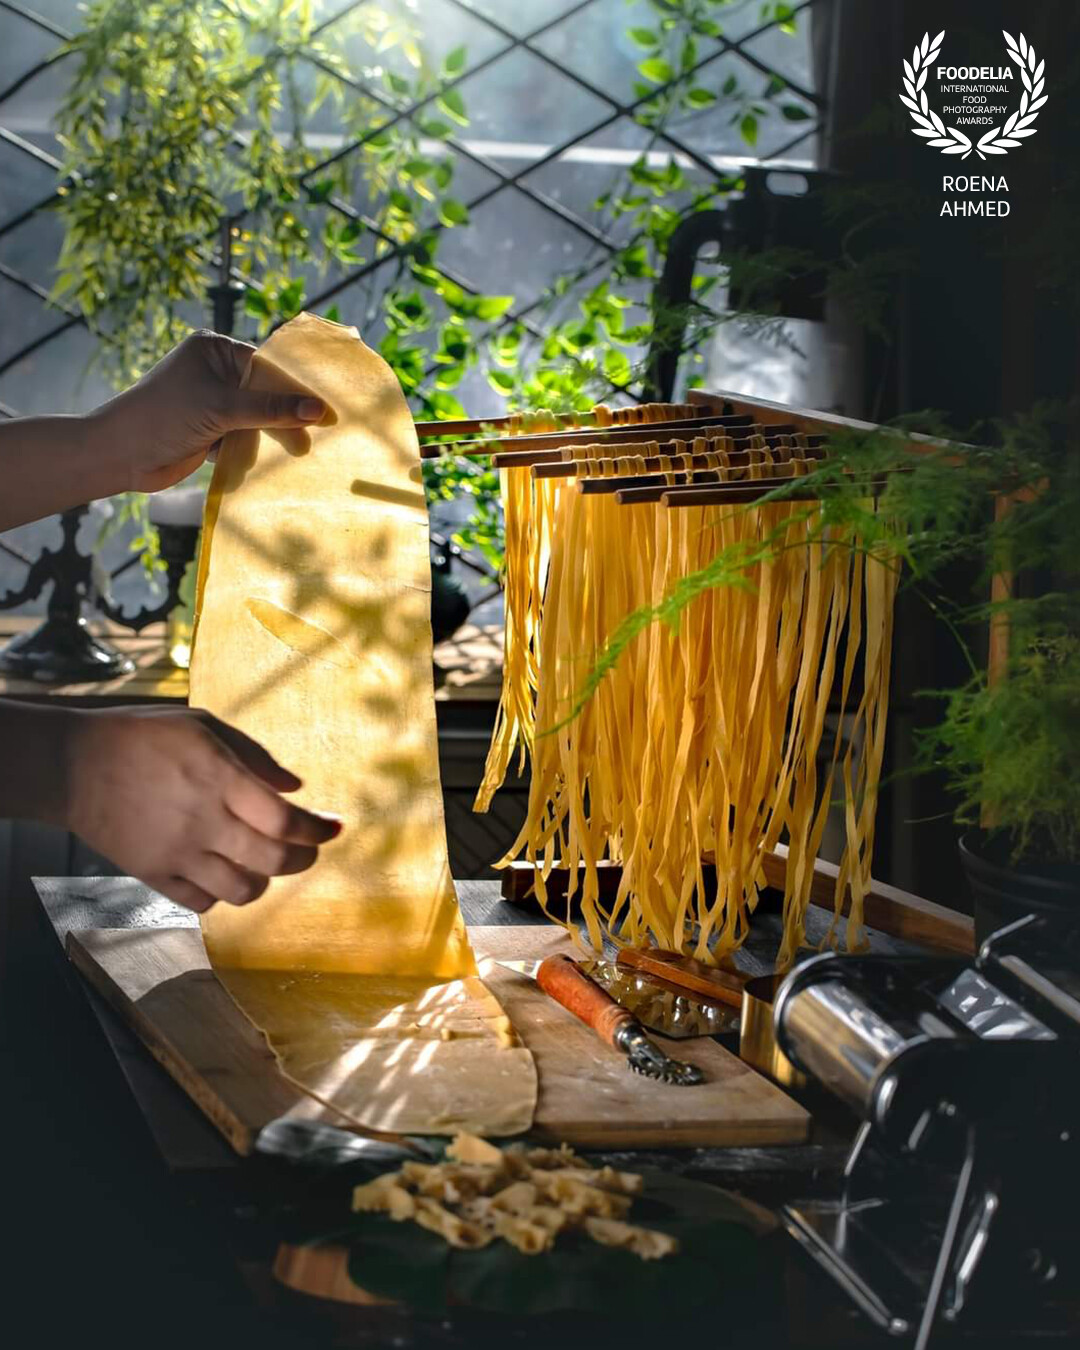 Homemade pasta is not only fresh but also far more delicious than the store bought ones..